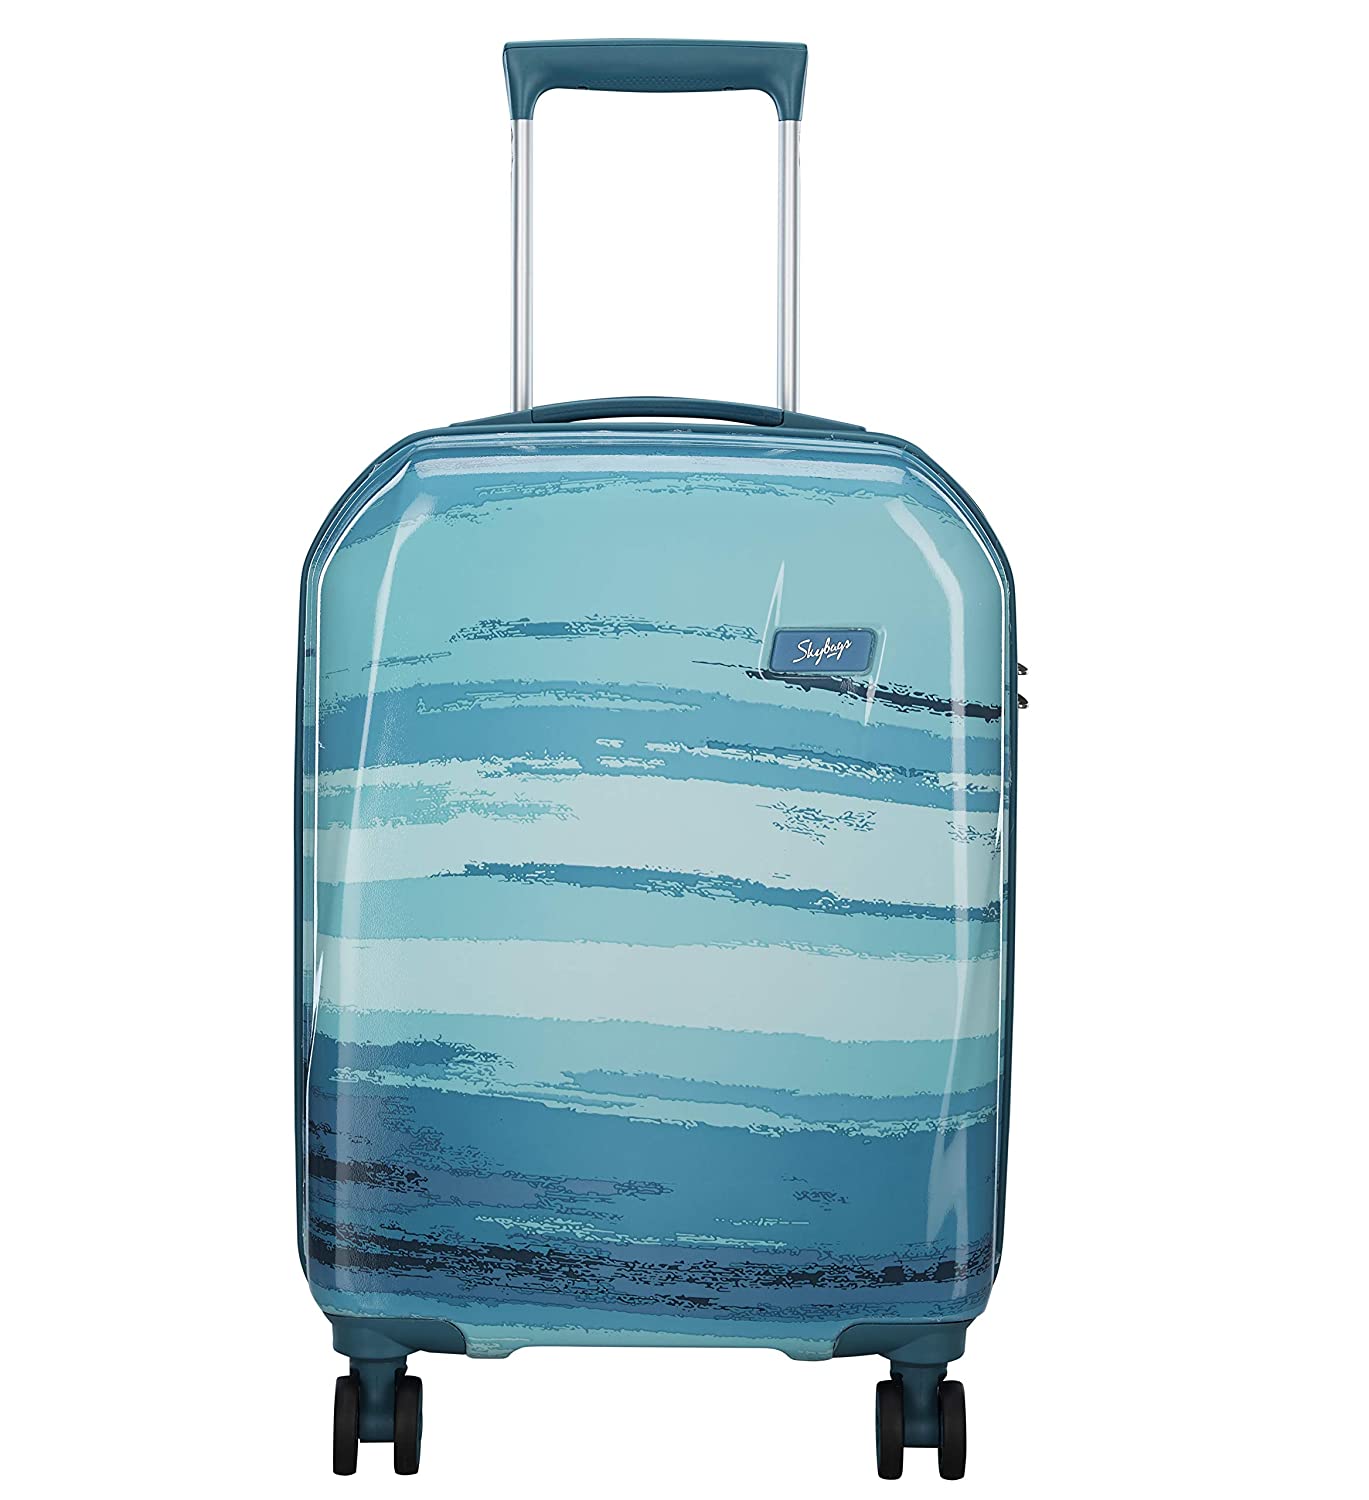 Skybags Rover Polycarbonate 67.6 Blue Hardsided Check-in Luggage Rover